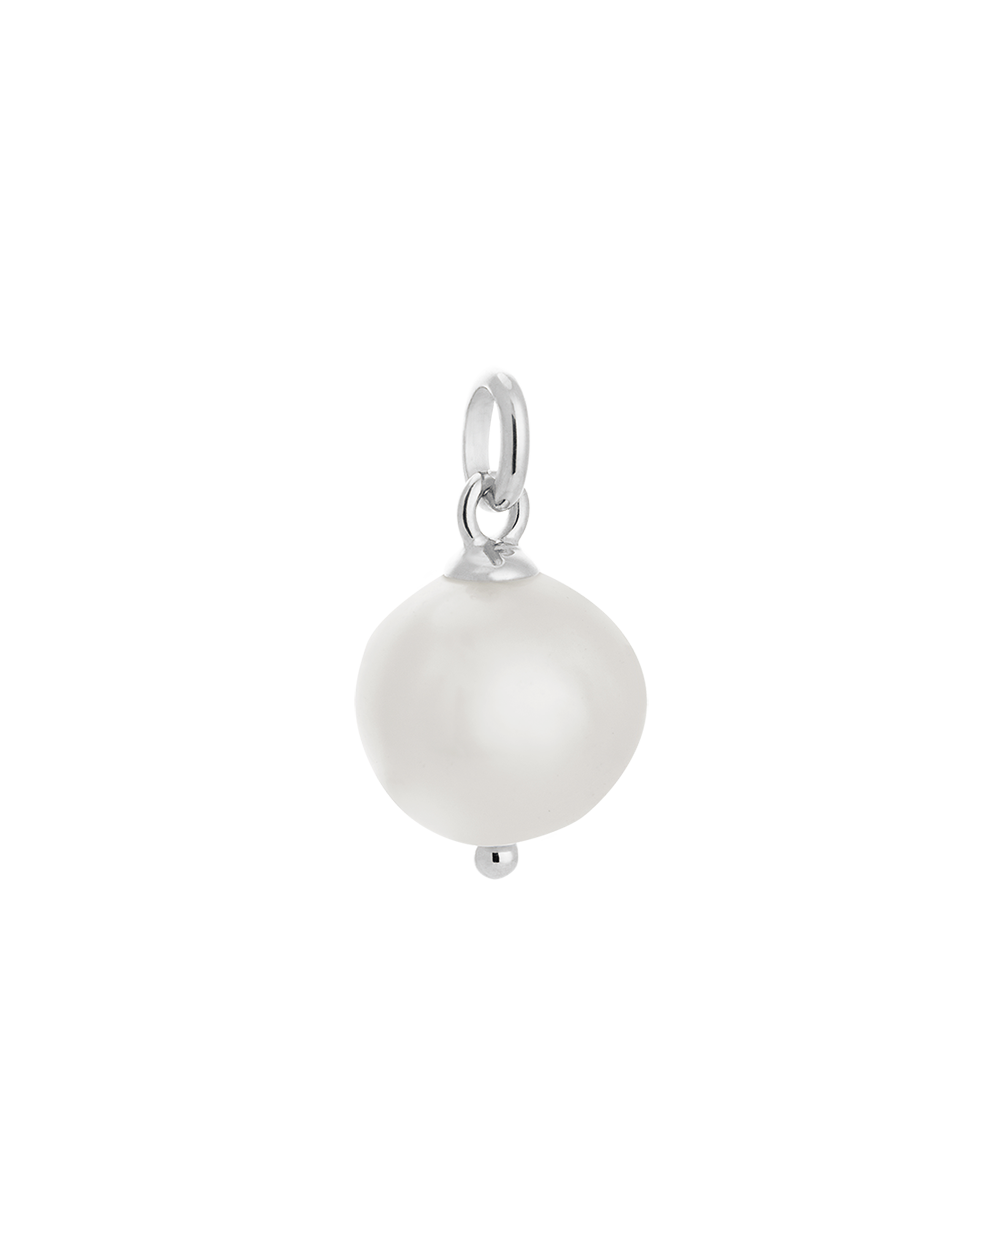 LARGE FRESHWATER PEARL (STERLING SILVER) - IMAGE 1